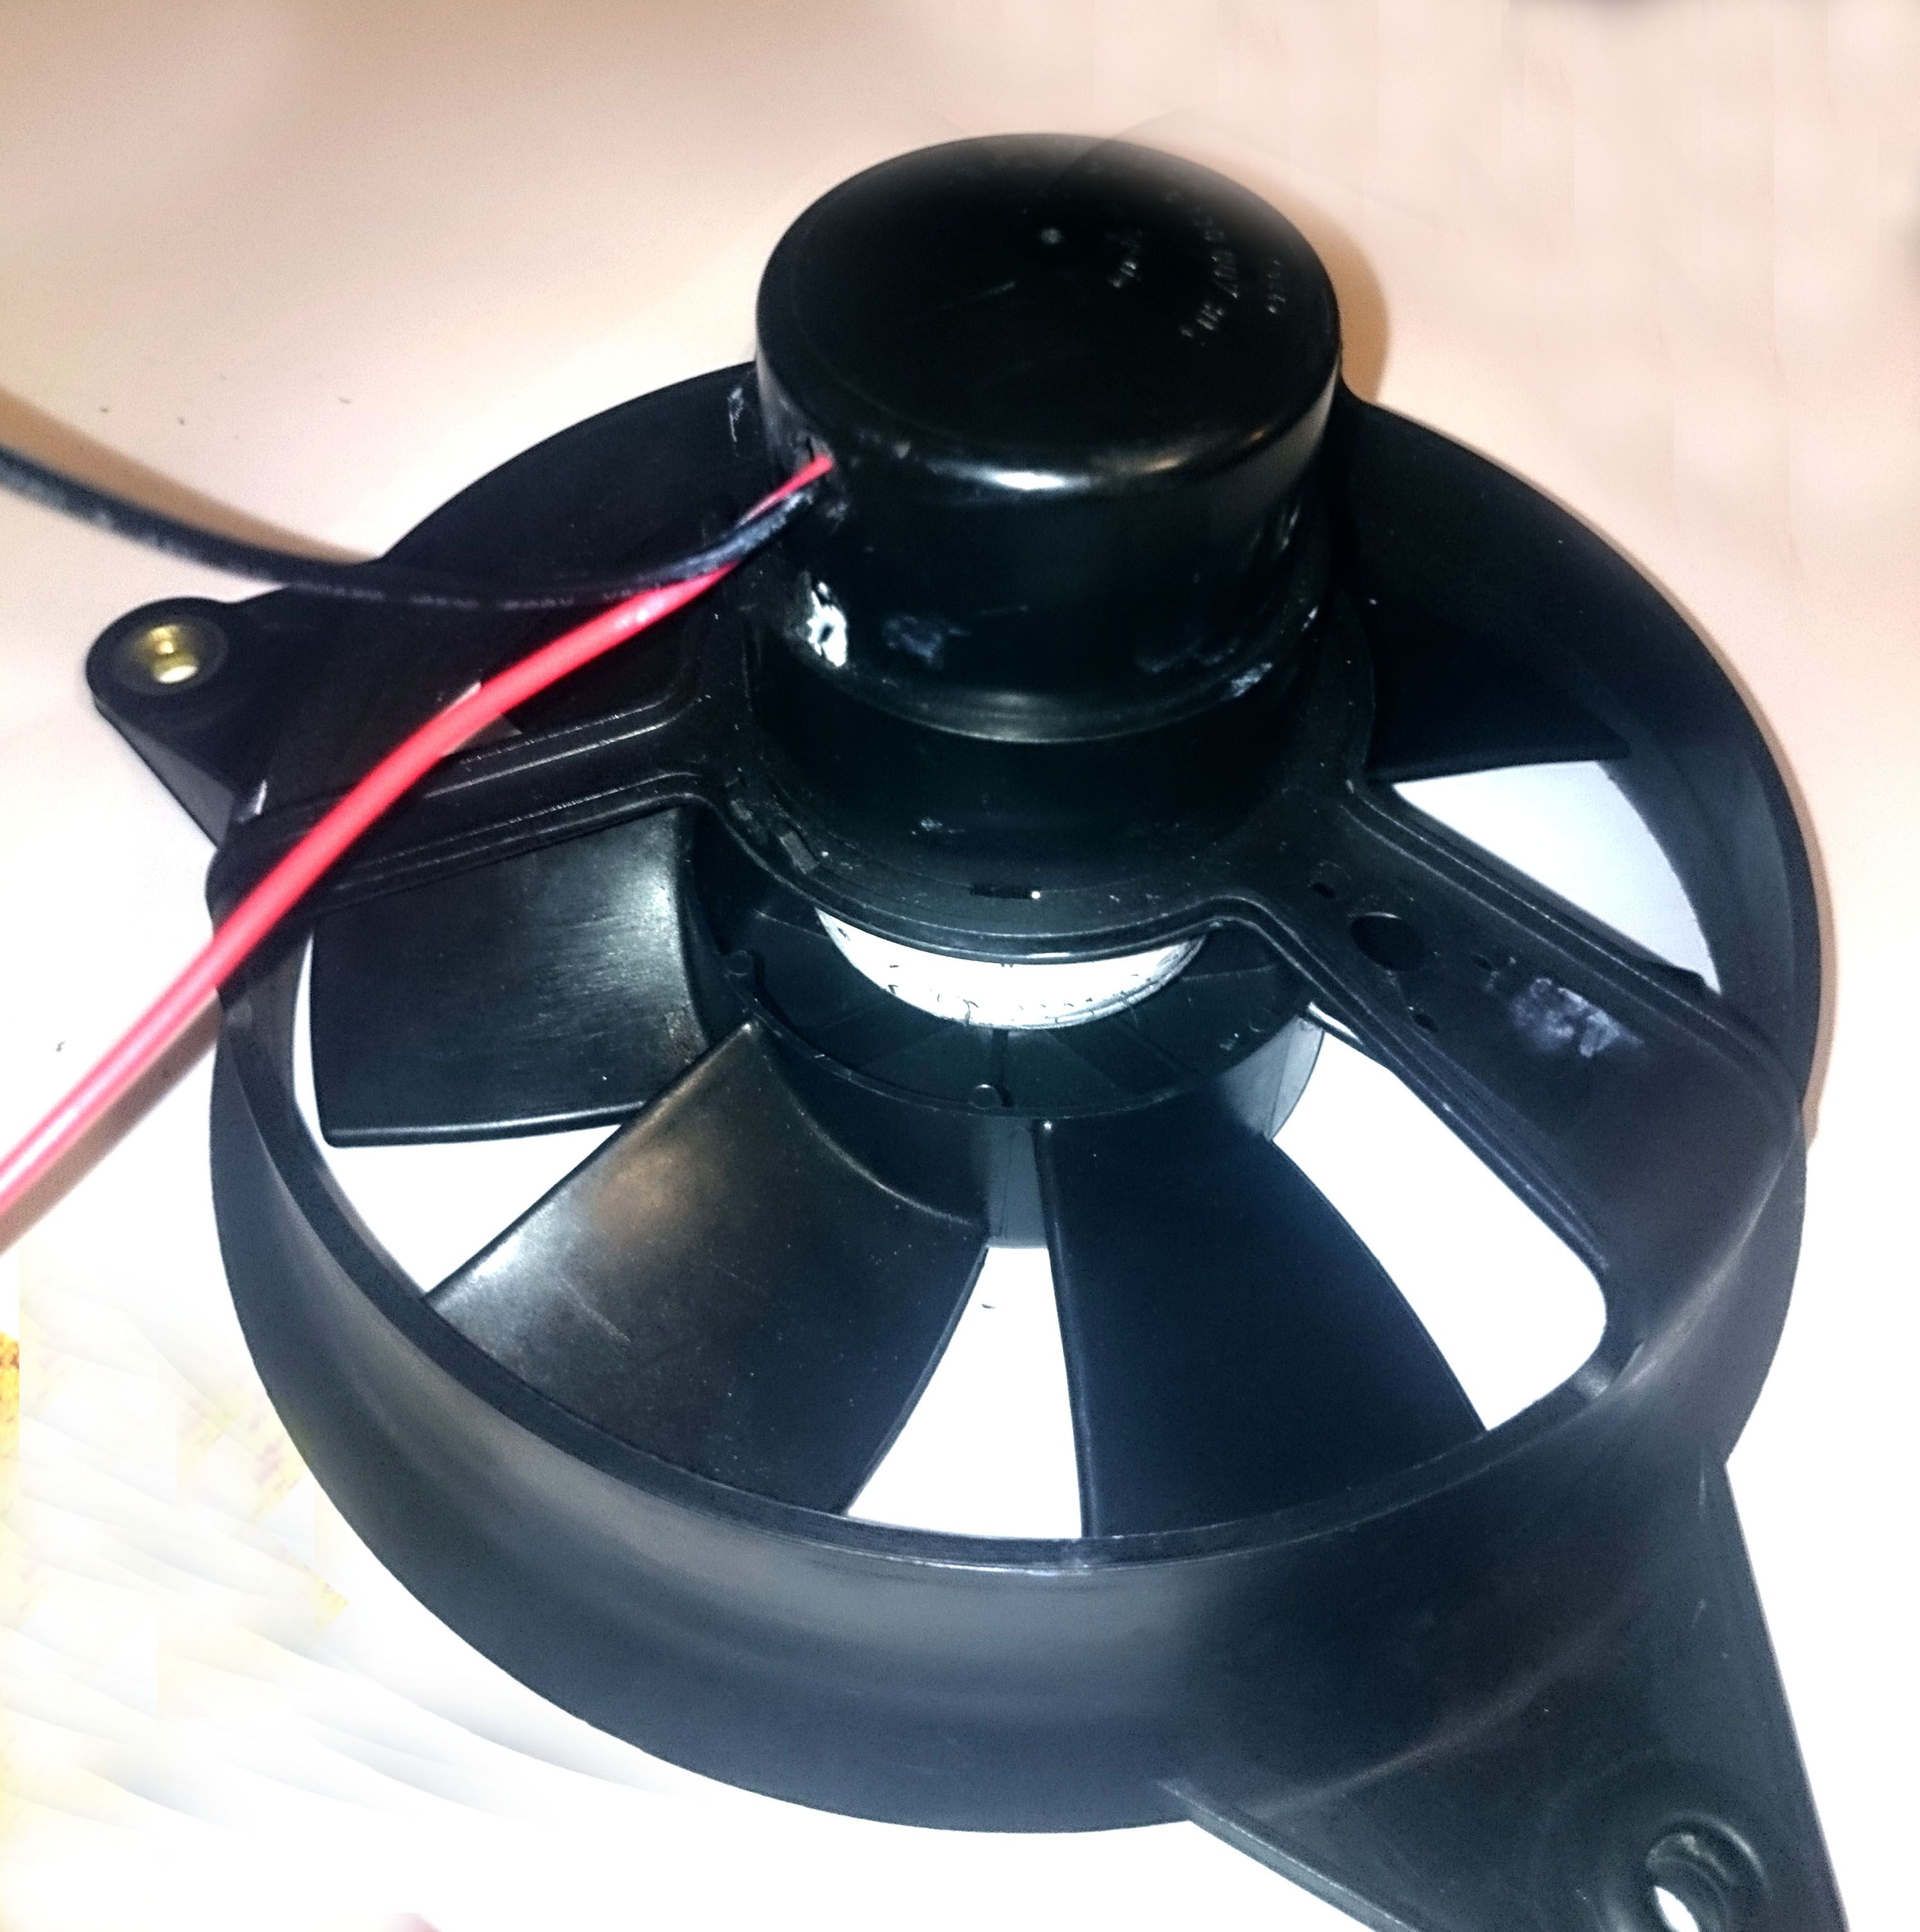 Suggested replacement for Cooling Fan 73f1b74c3ce549befb0de19cbcb25d0e